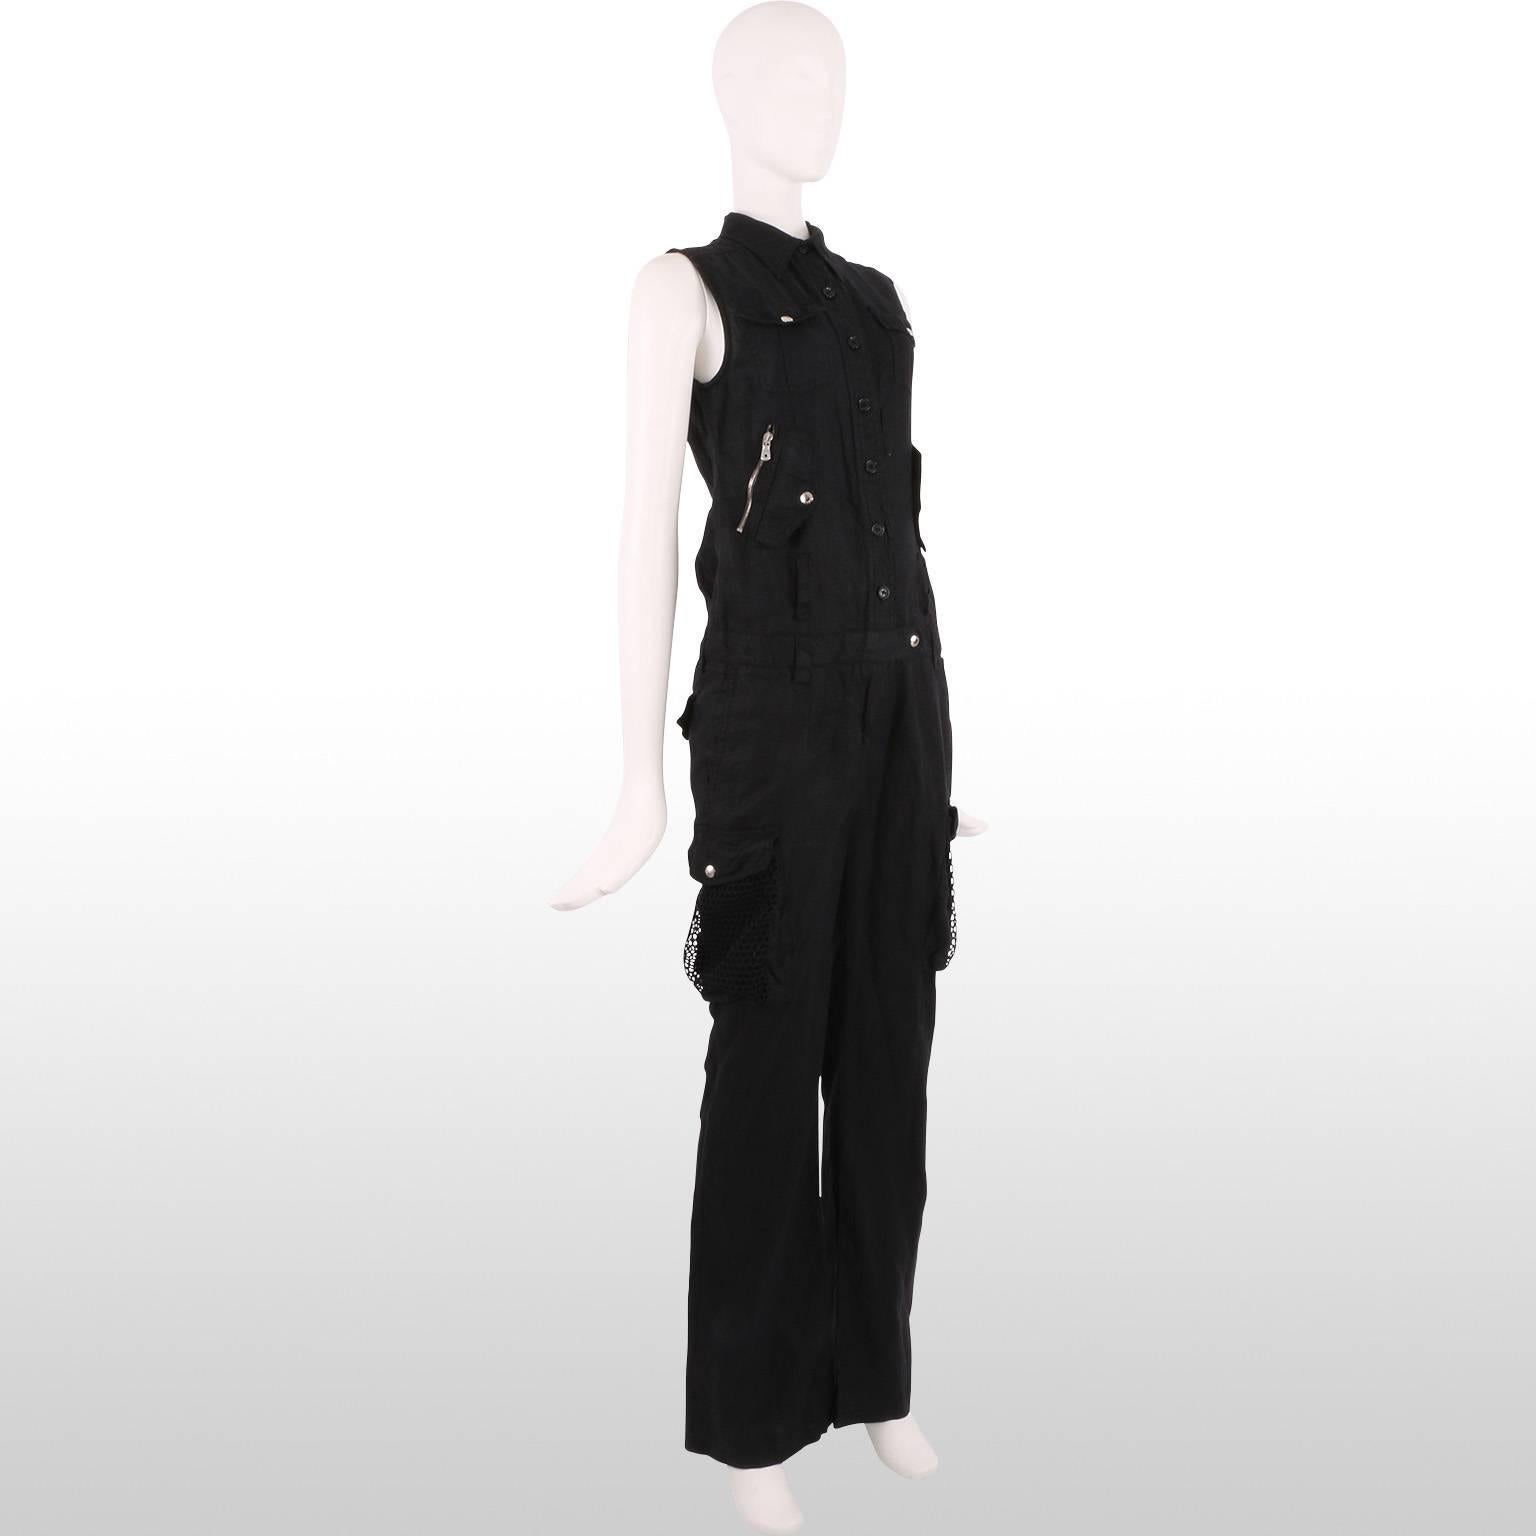 This is a black multiple pockets jumpsuit by Dolce and Gabbana. It features different sized pockets with mesh ones just below the hips giving the garment some volume. It also gives a touch of modernity to the linen piece, on top of the grey metal